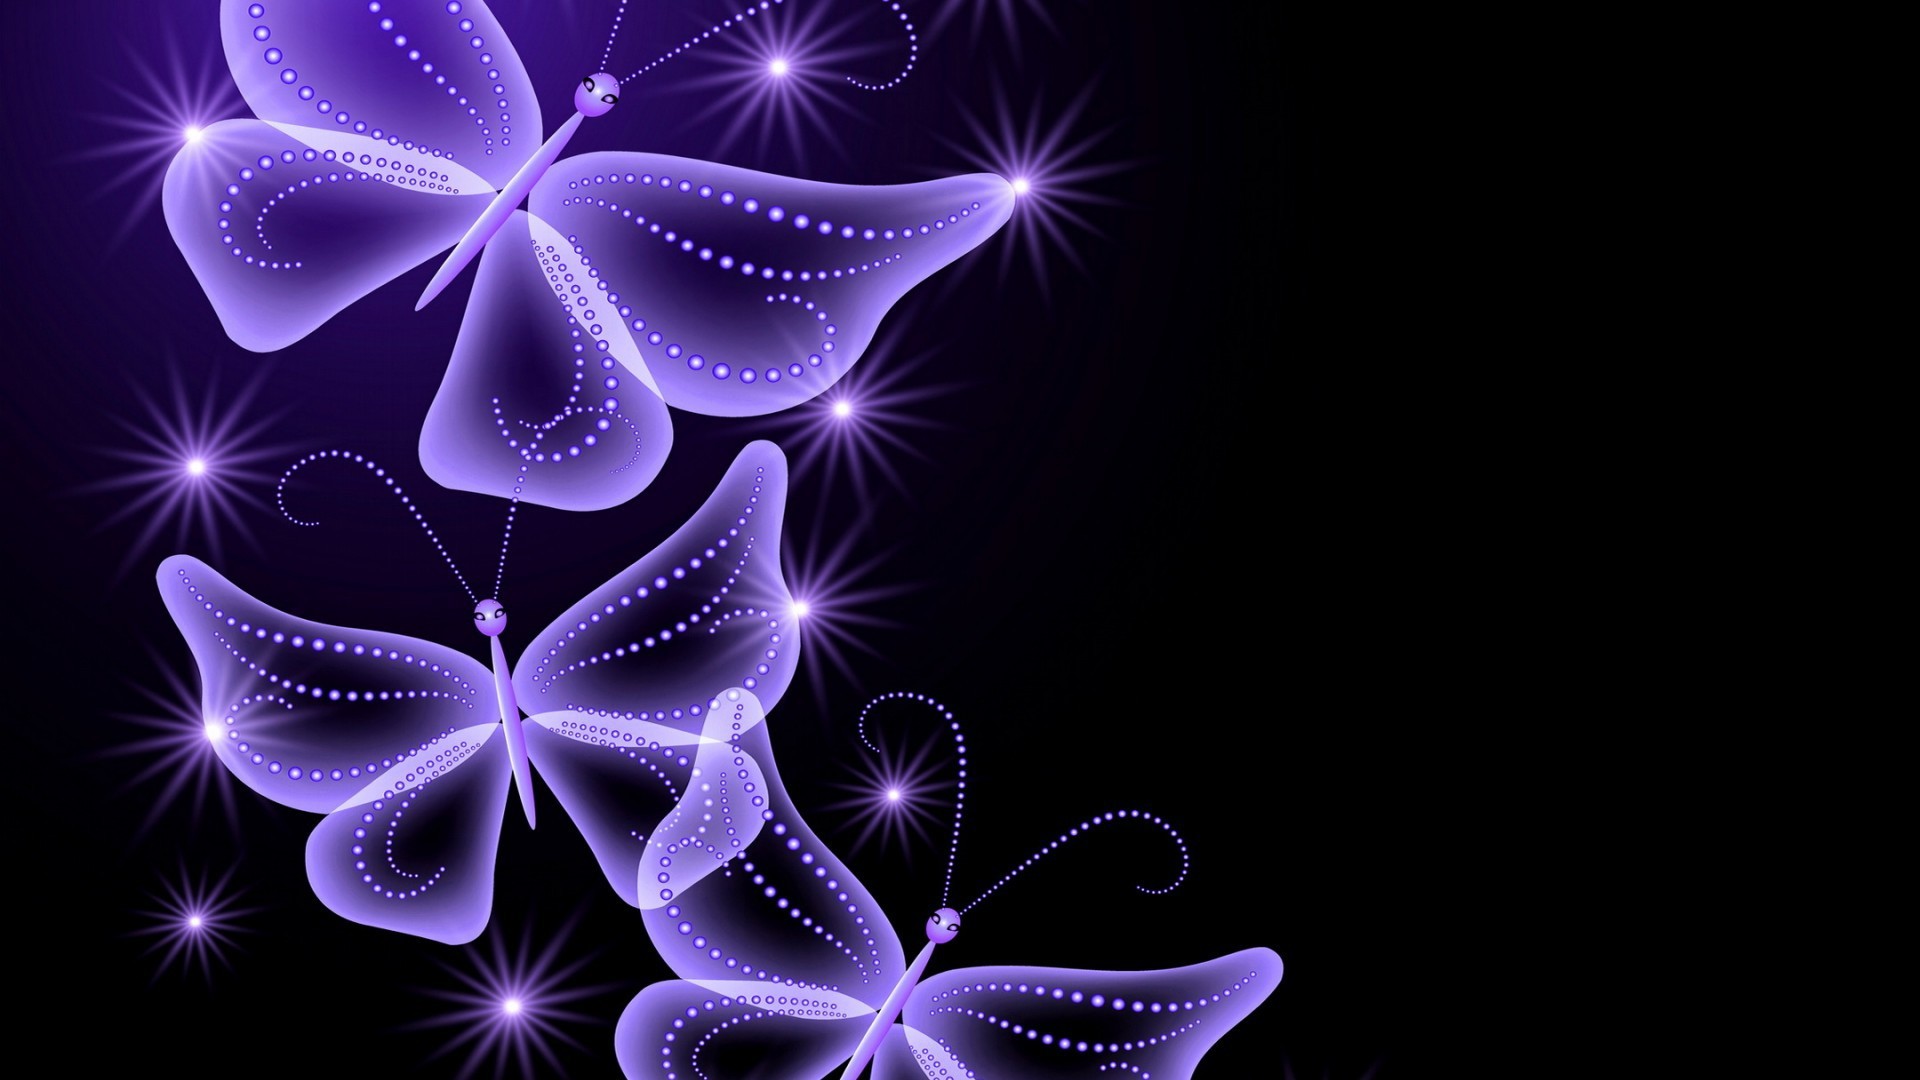 1920x1080 Crystal butterfly wallpapers and images - wallpapers .